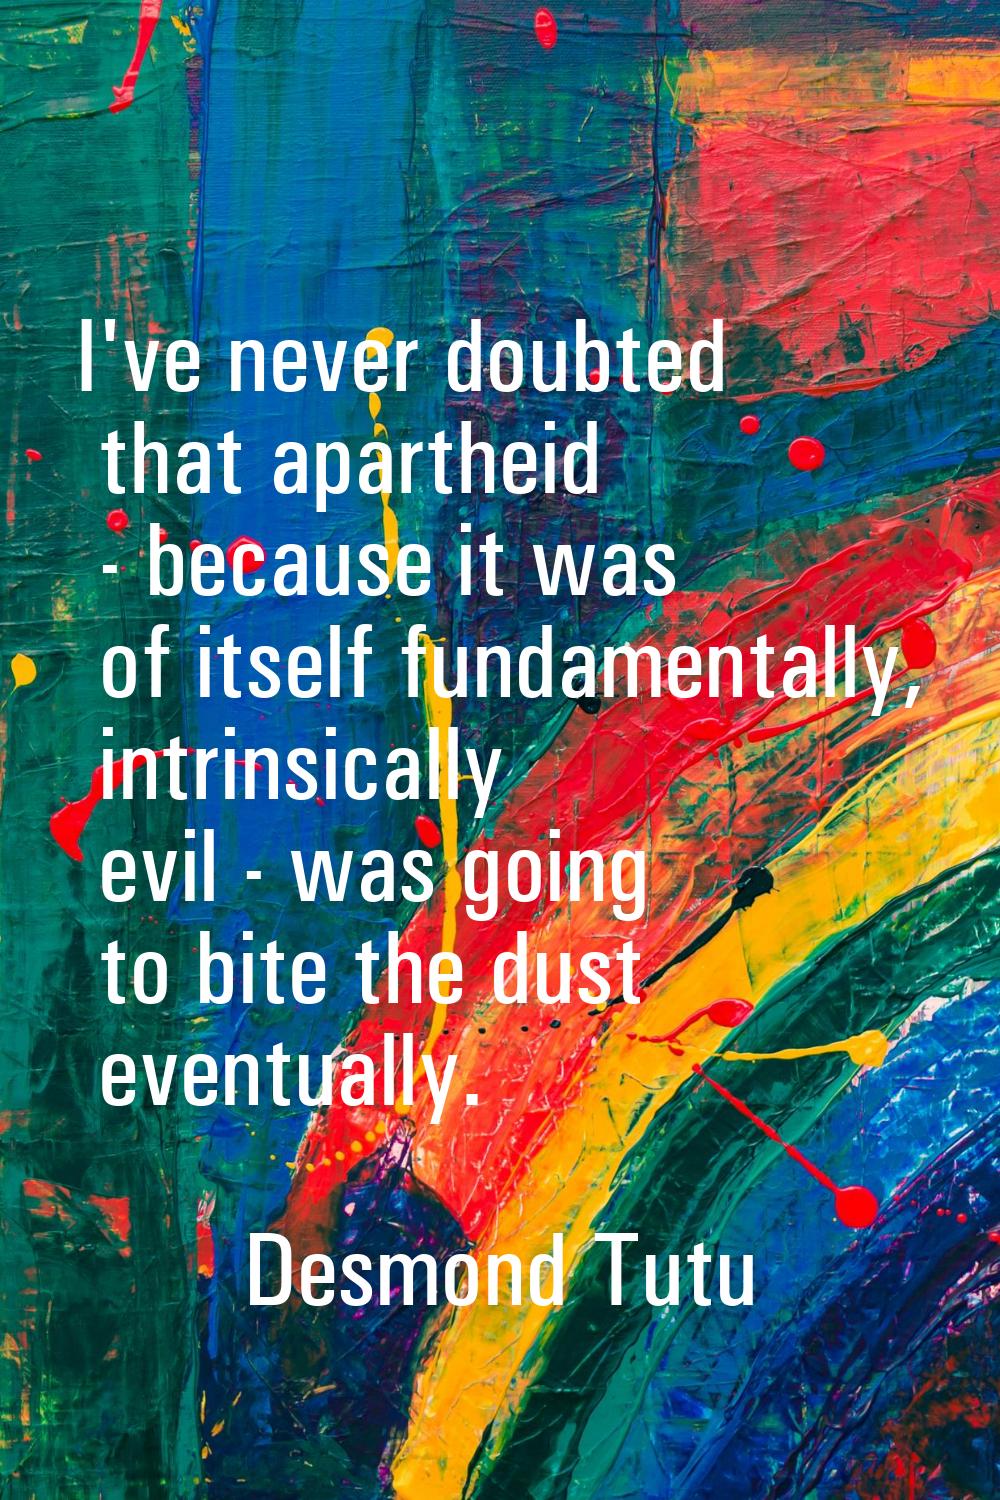 I've never doubted that apartheid - because it was of itself fundamentally, intrinsically evil - wa